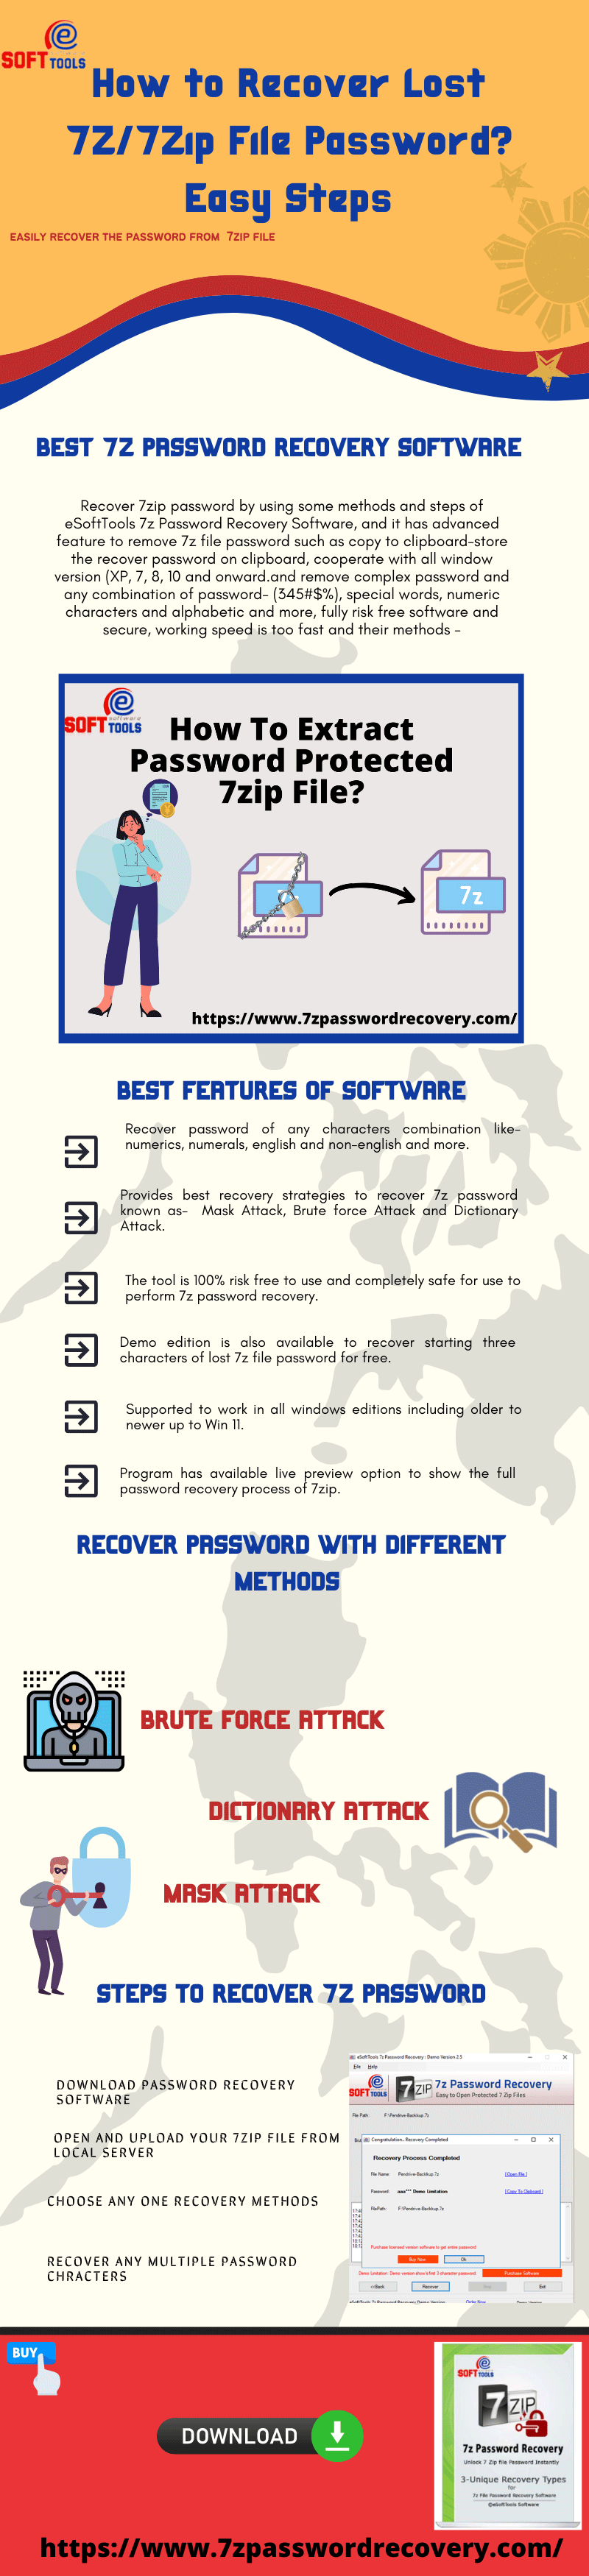 howtorecoverlost7zpassword.png